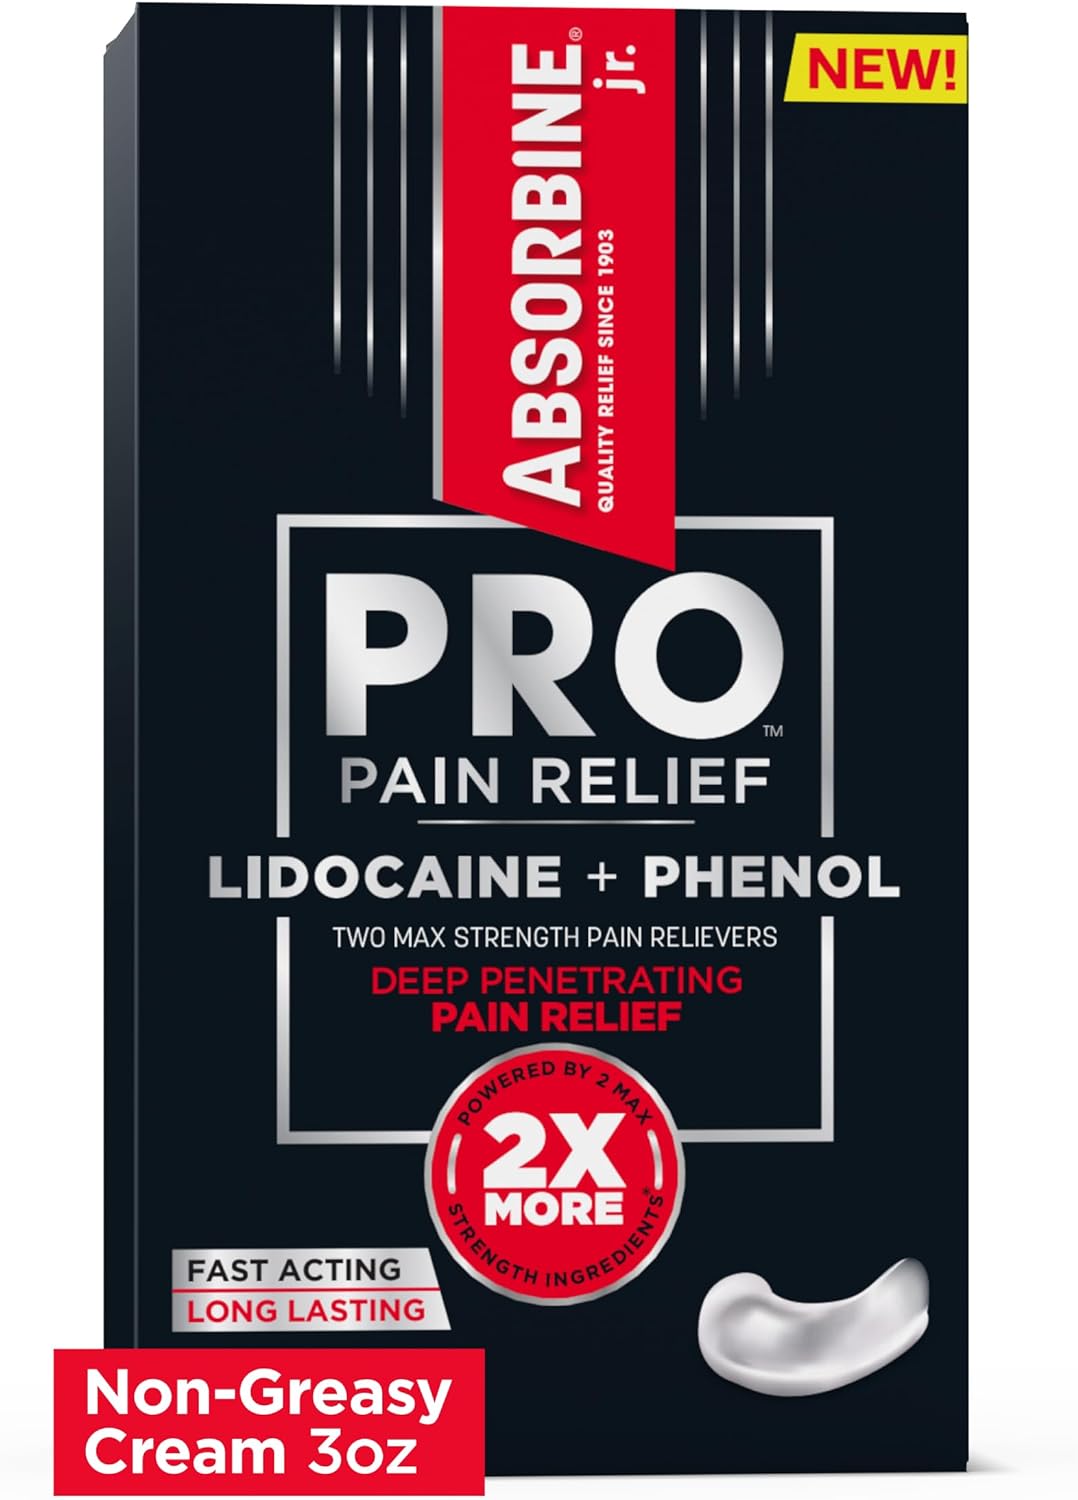 Absorbine Jr. PRO Max Strength Lidocaine Cream - Fast-Acting Numbing Pain Relief for Nerve, Muscle, Joint Discomfort - Non-Greasy, 3oz Tube